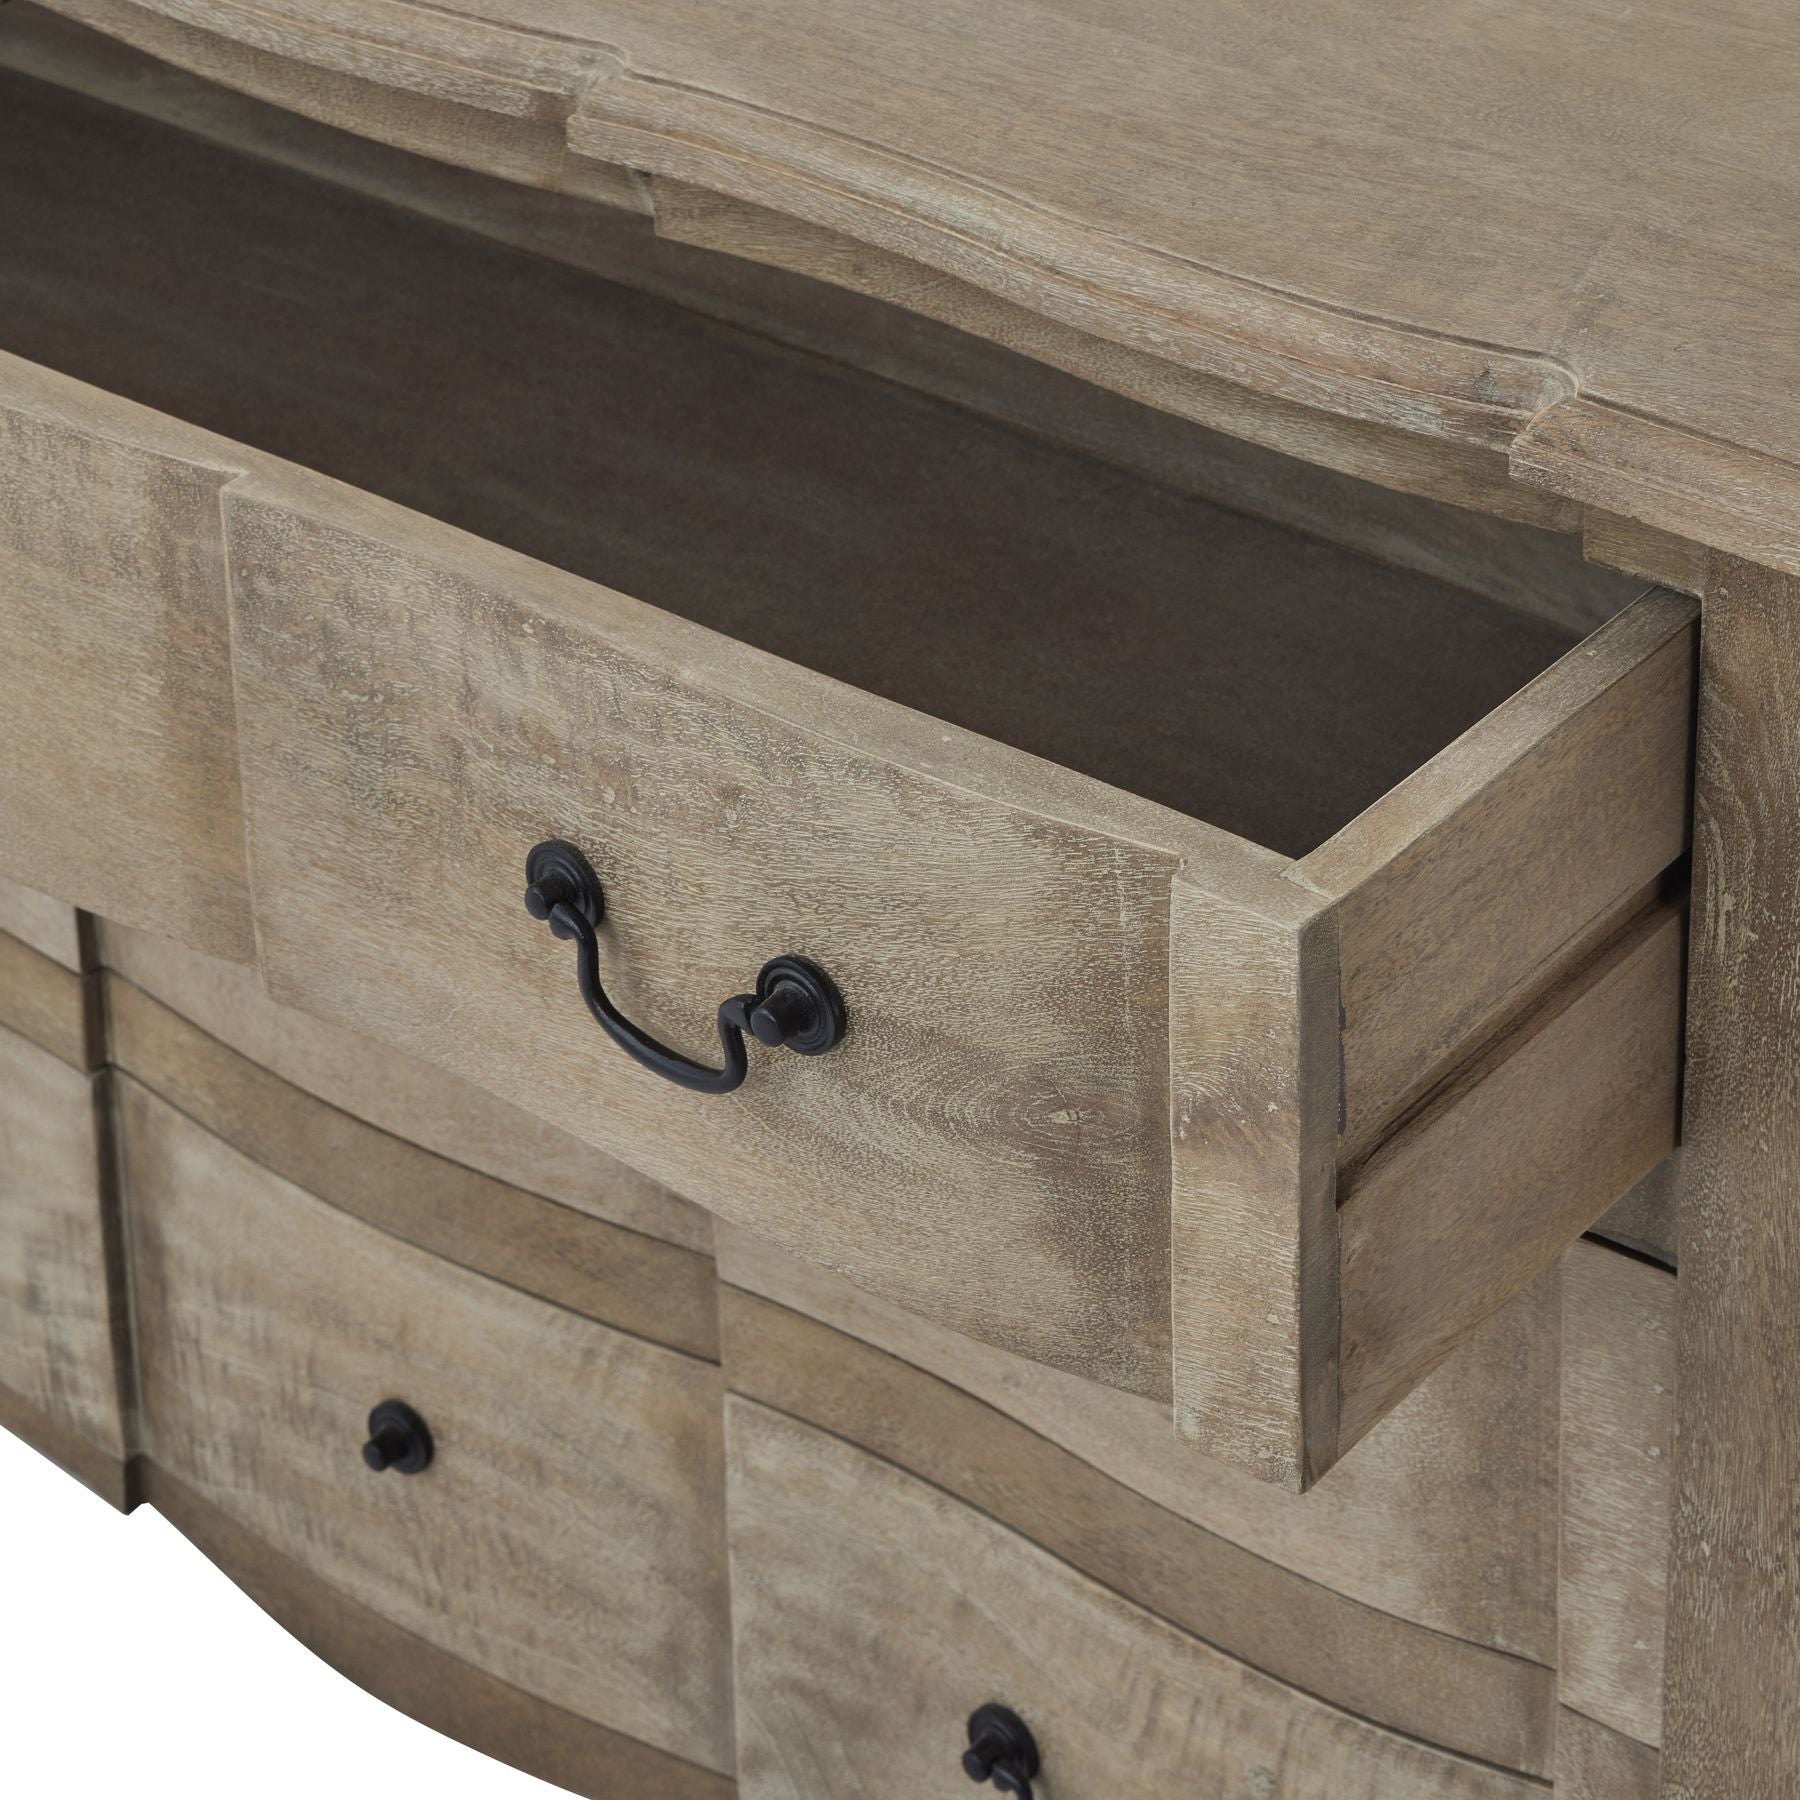 Evesham Collection 3 Drawer Chest Pre-order for the end of April